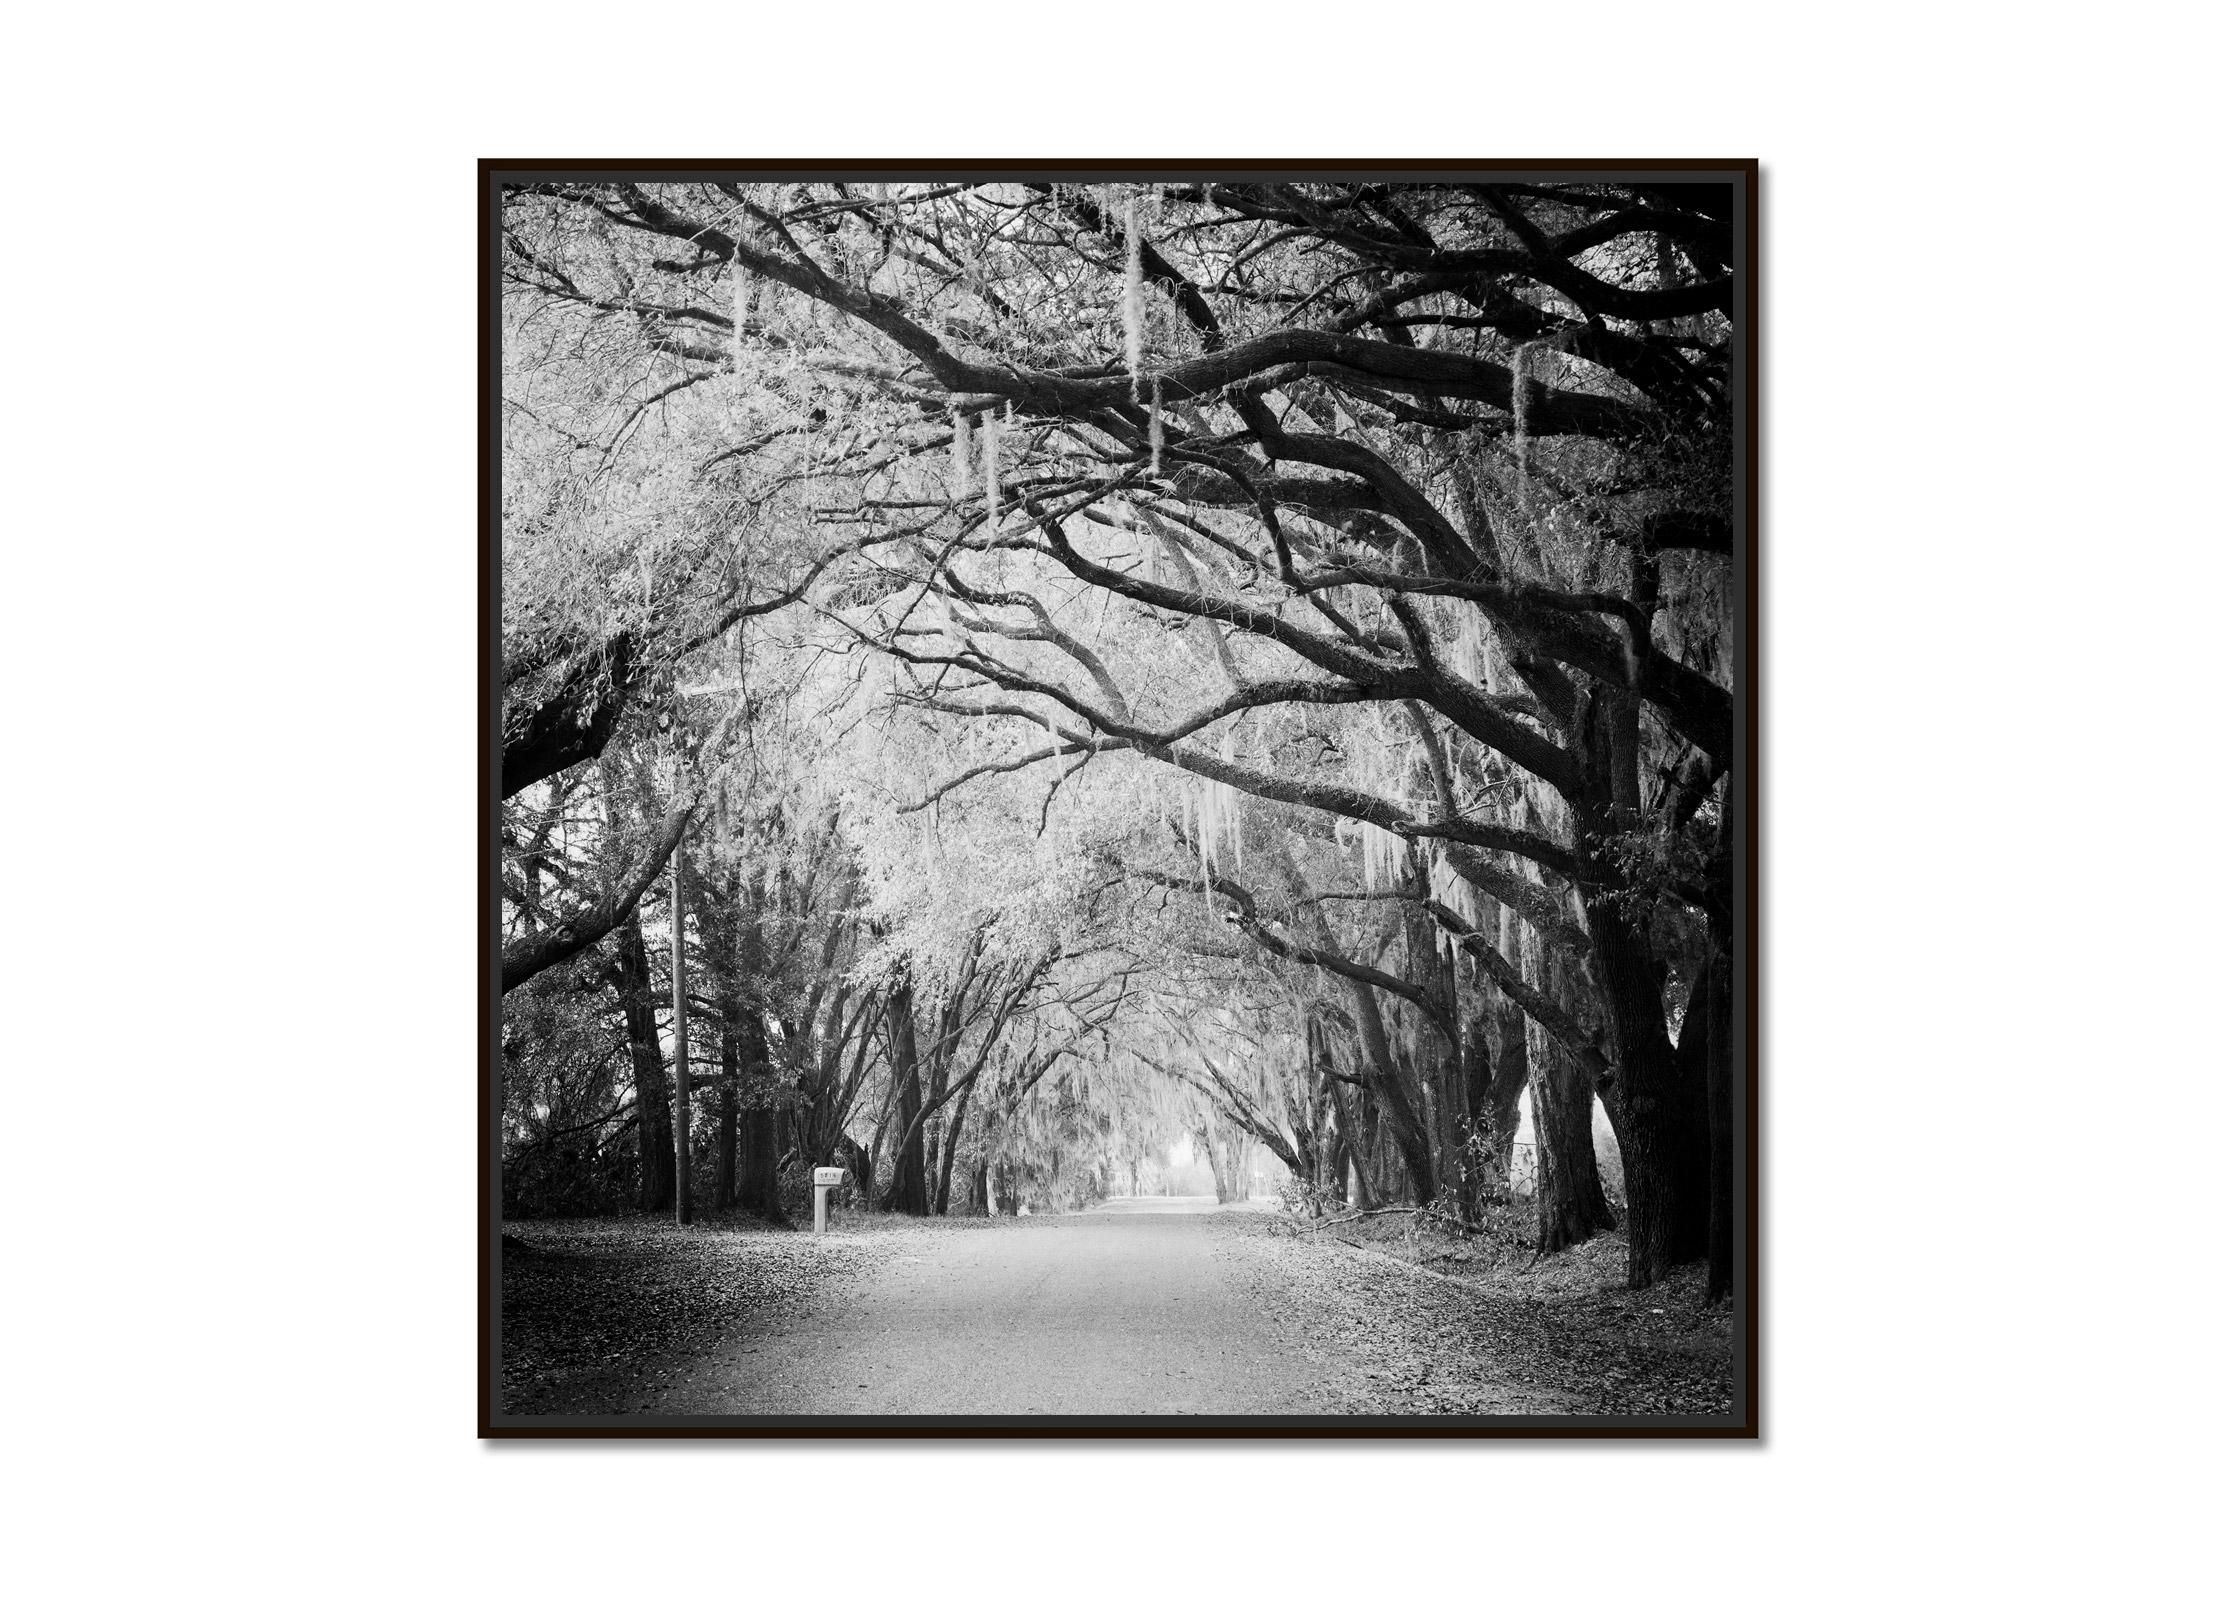 Fairytale Forest, Tree Avenue, Florida, black and white photography, landscape - Photograph by Gerald Berghammer